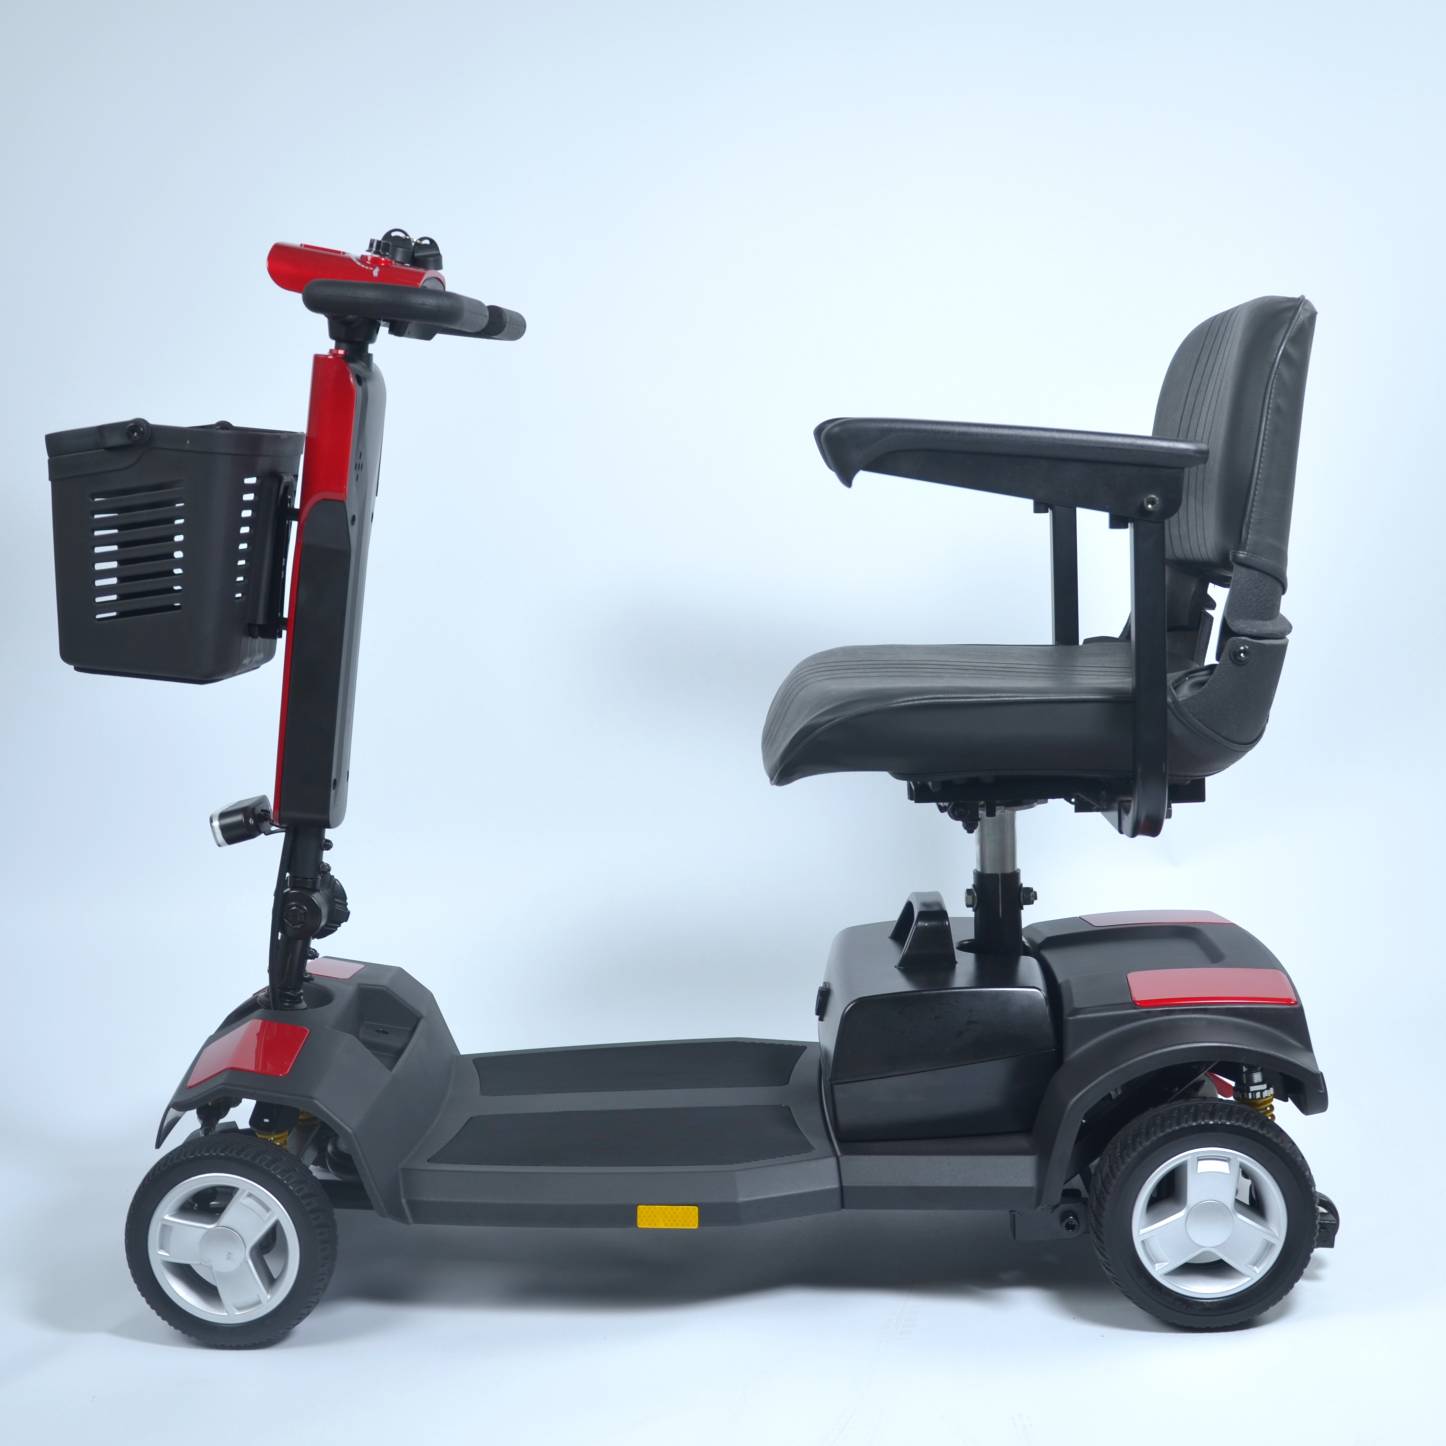 Small size mobility scooter